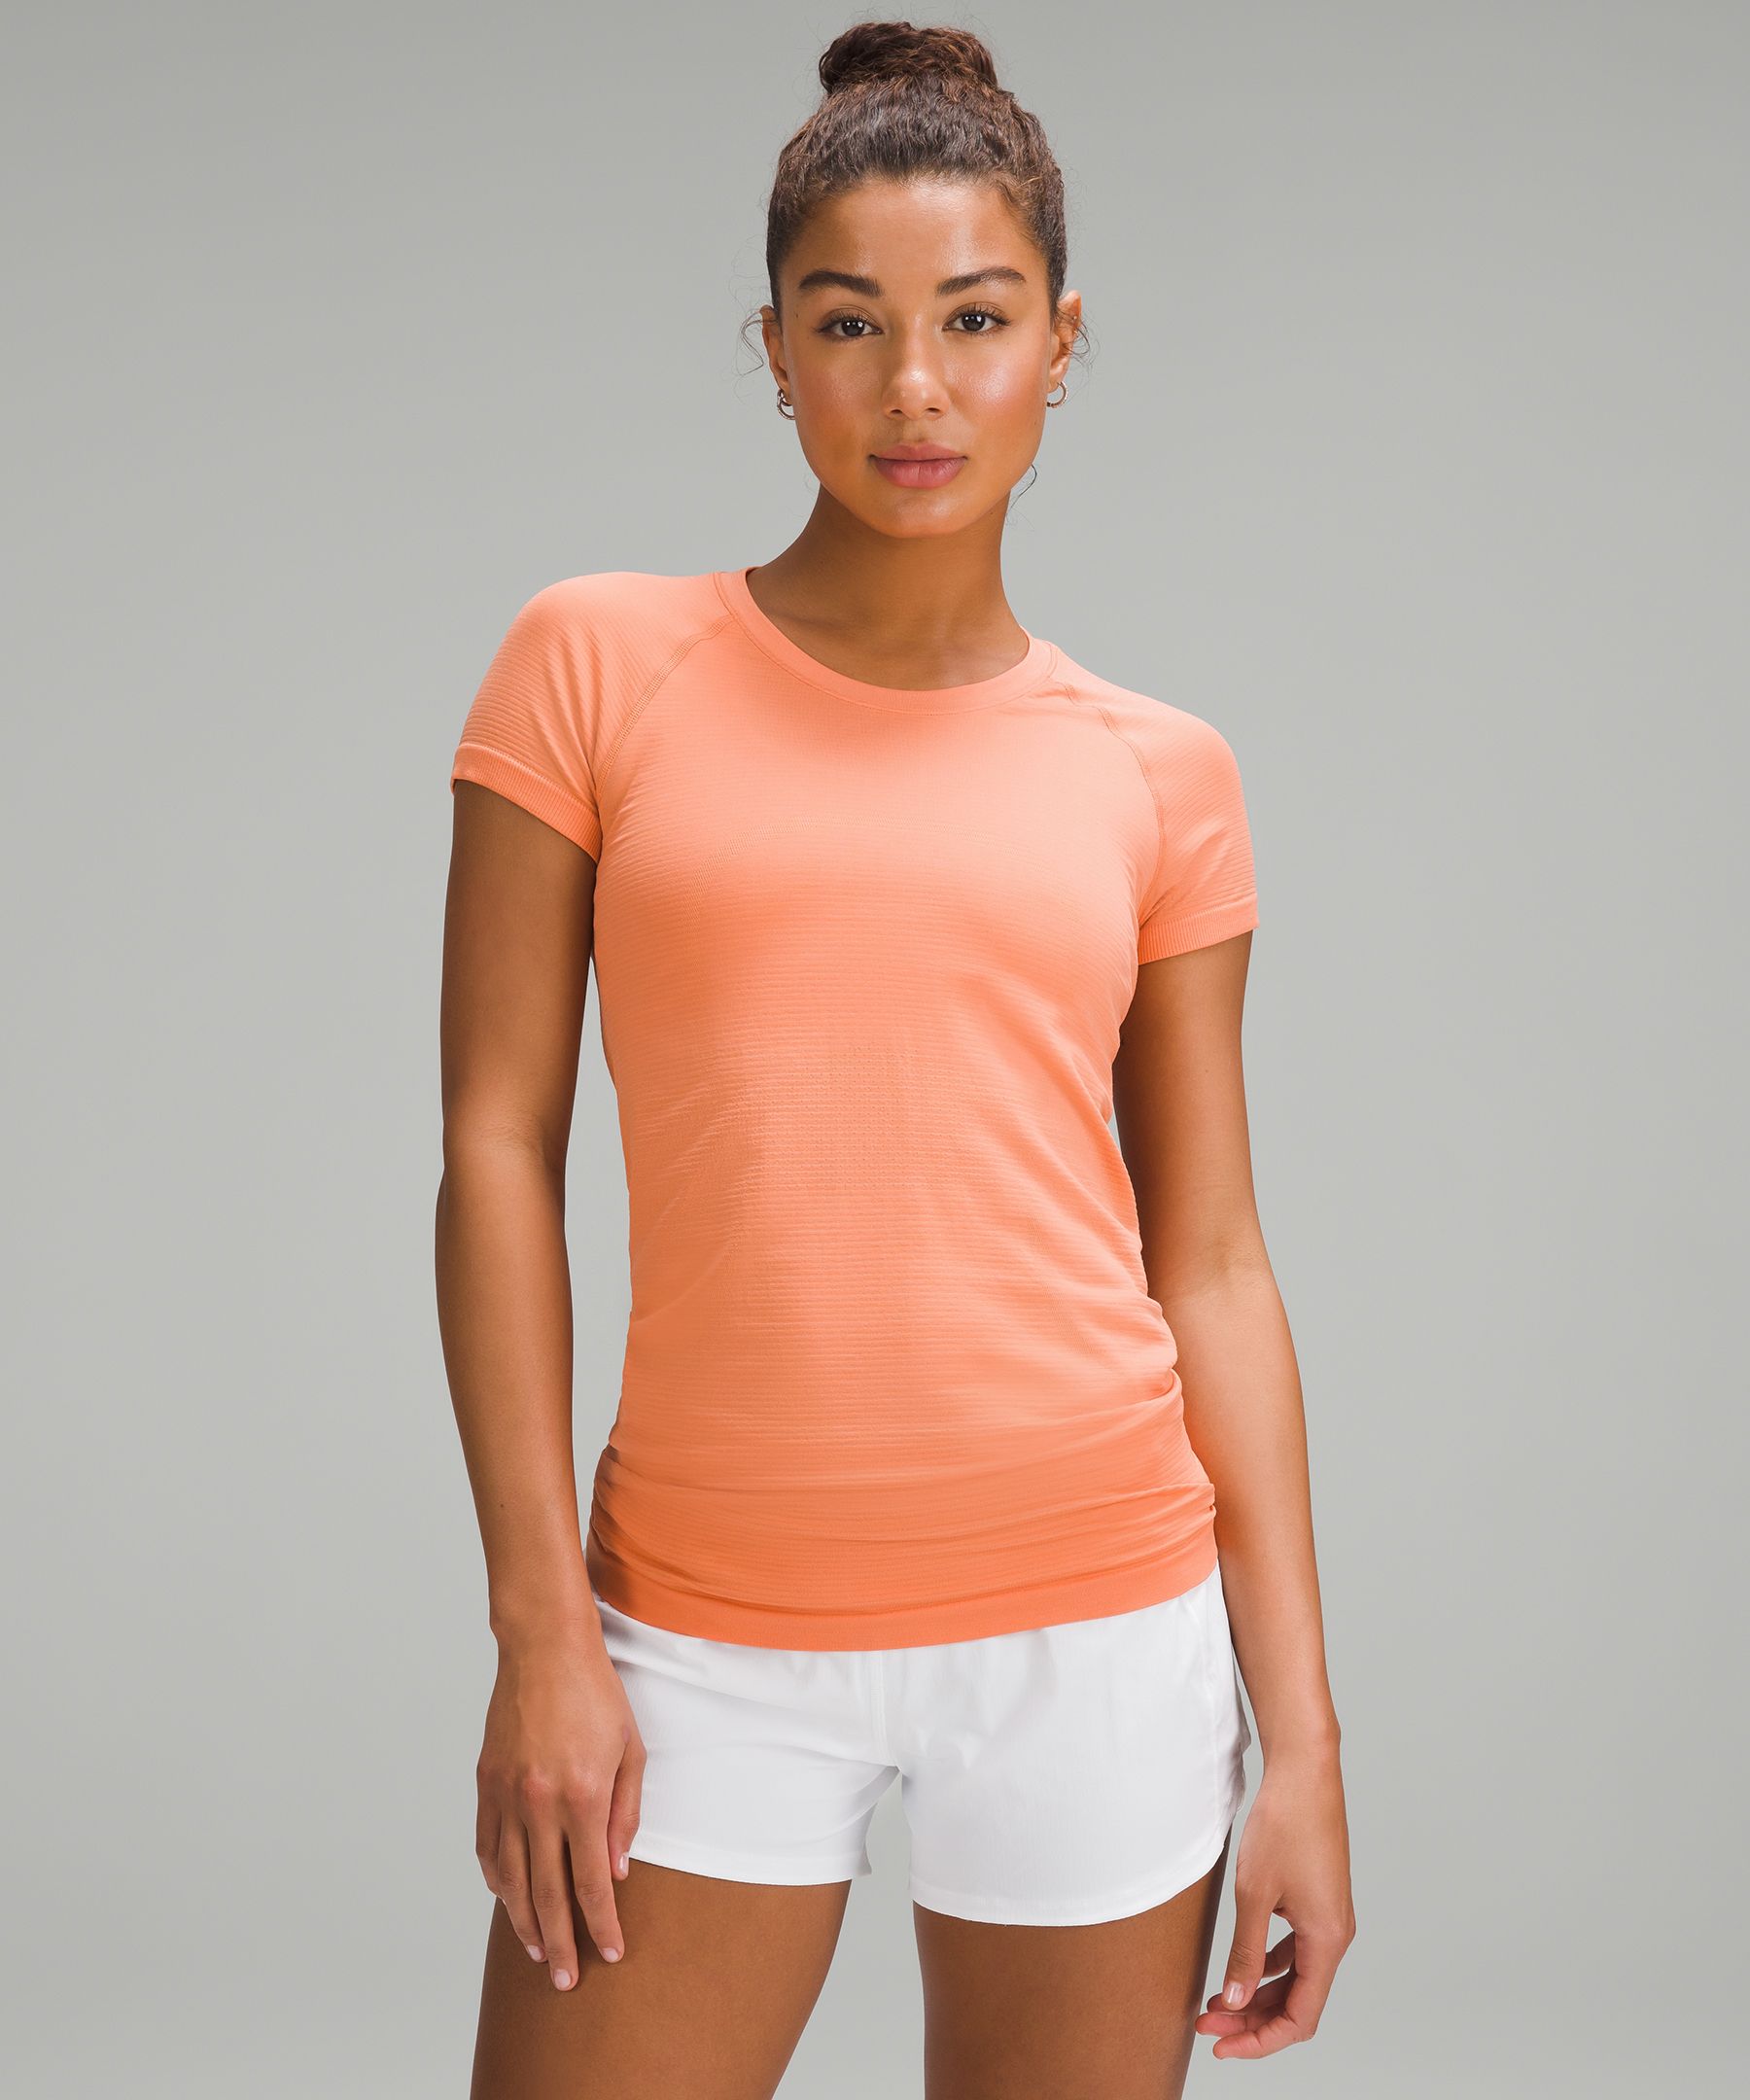 lululemon spring newness: Shop our top 6 new arrivals